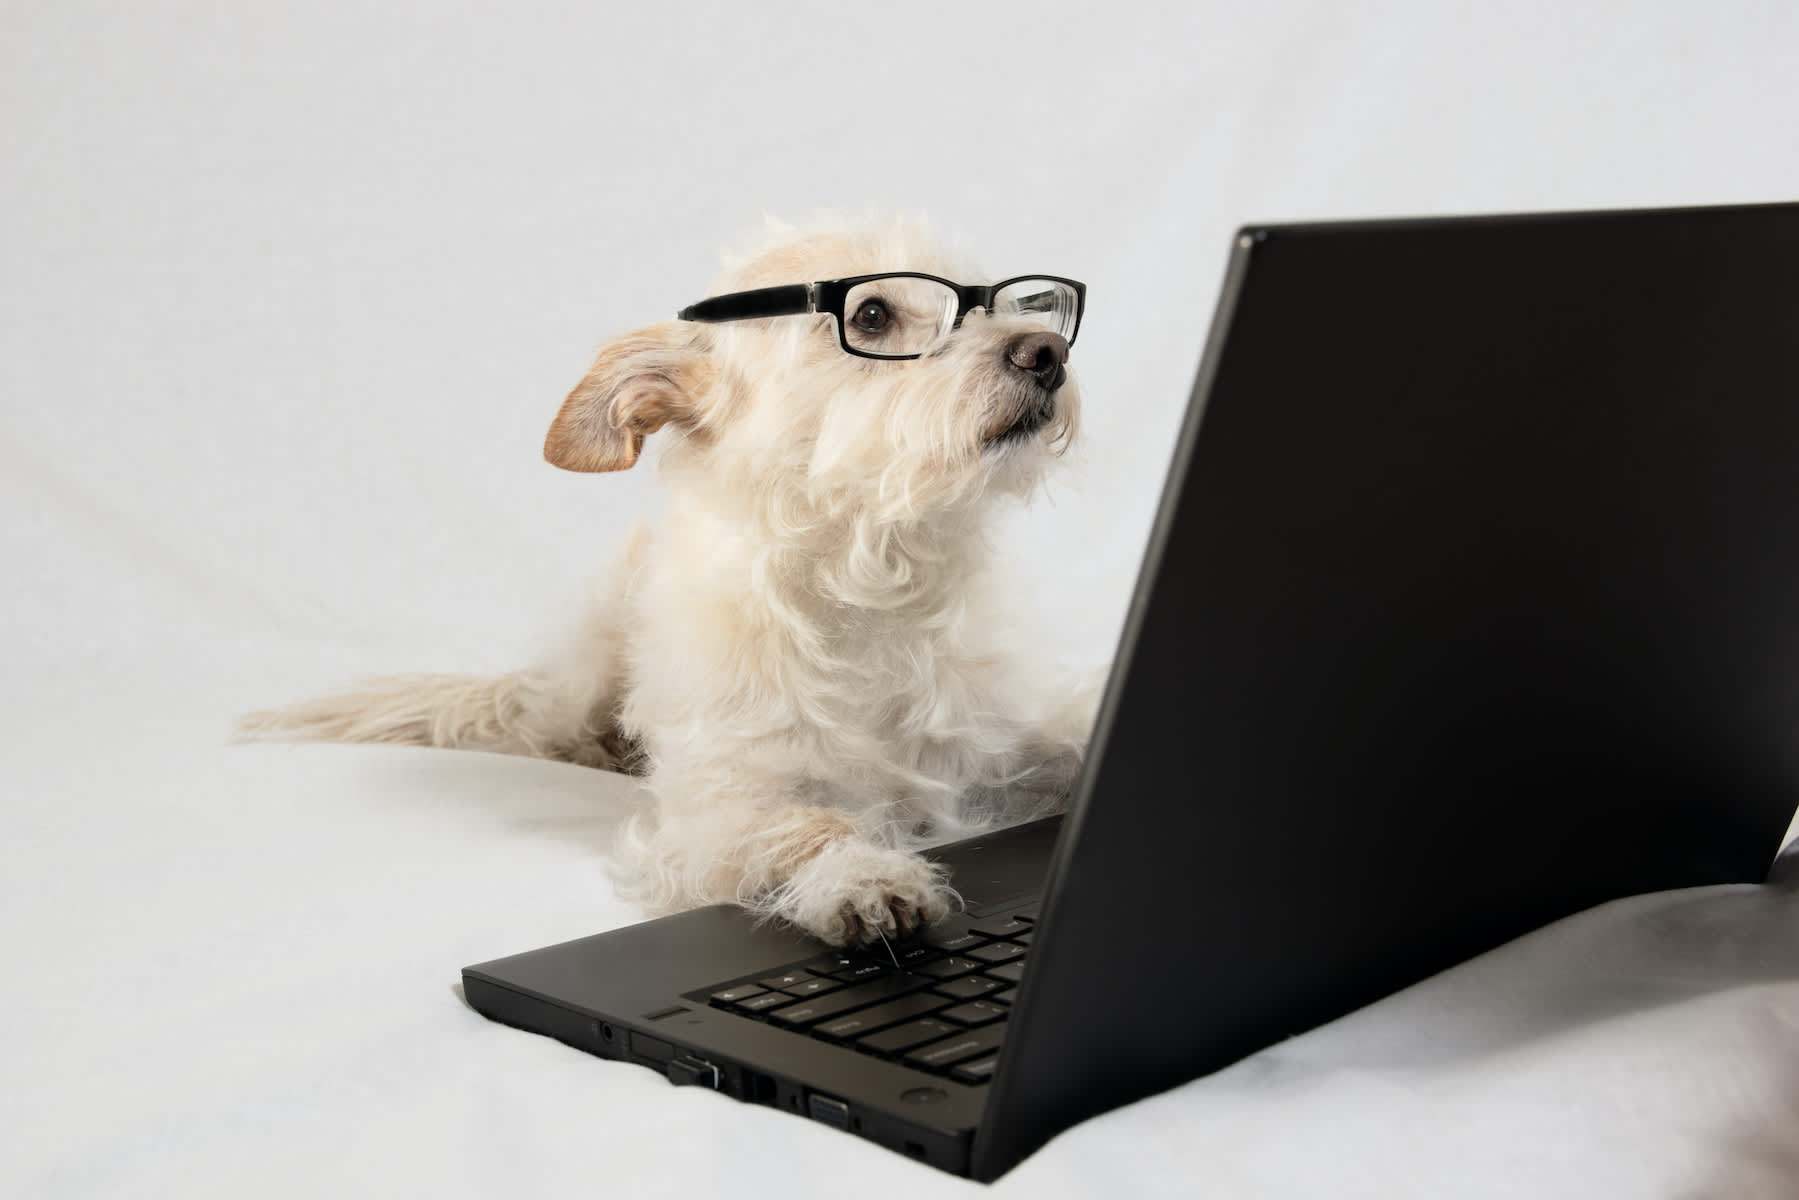 Canva - Terrier wearing glasses and working at laptop